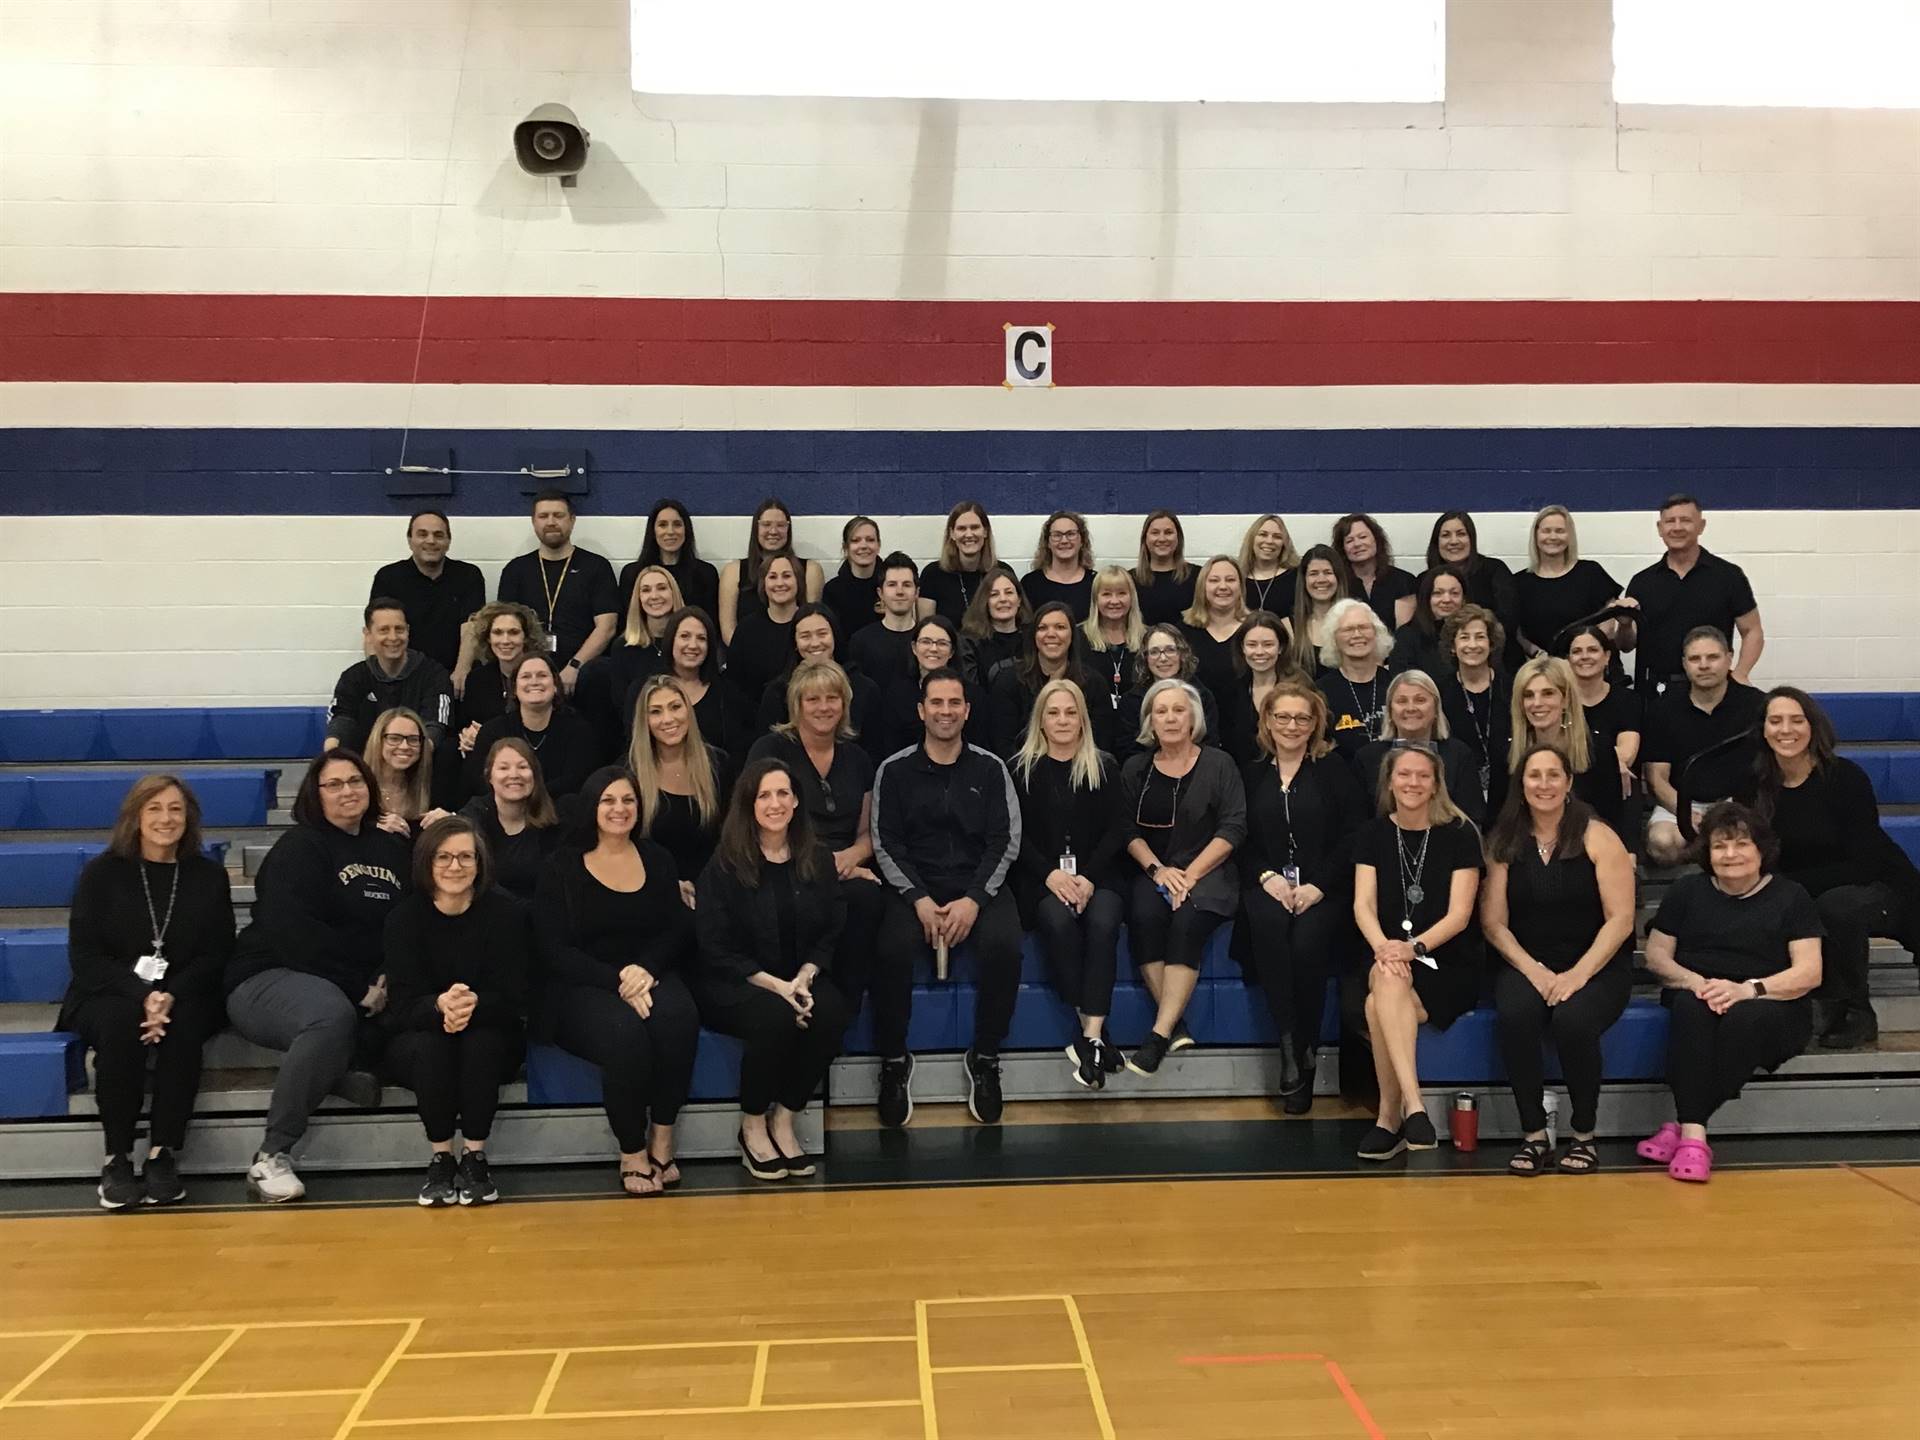 SAES staff posing in bleachers in gym